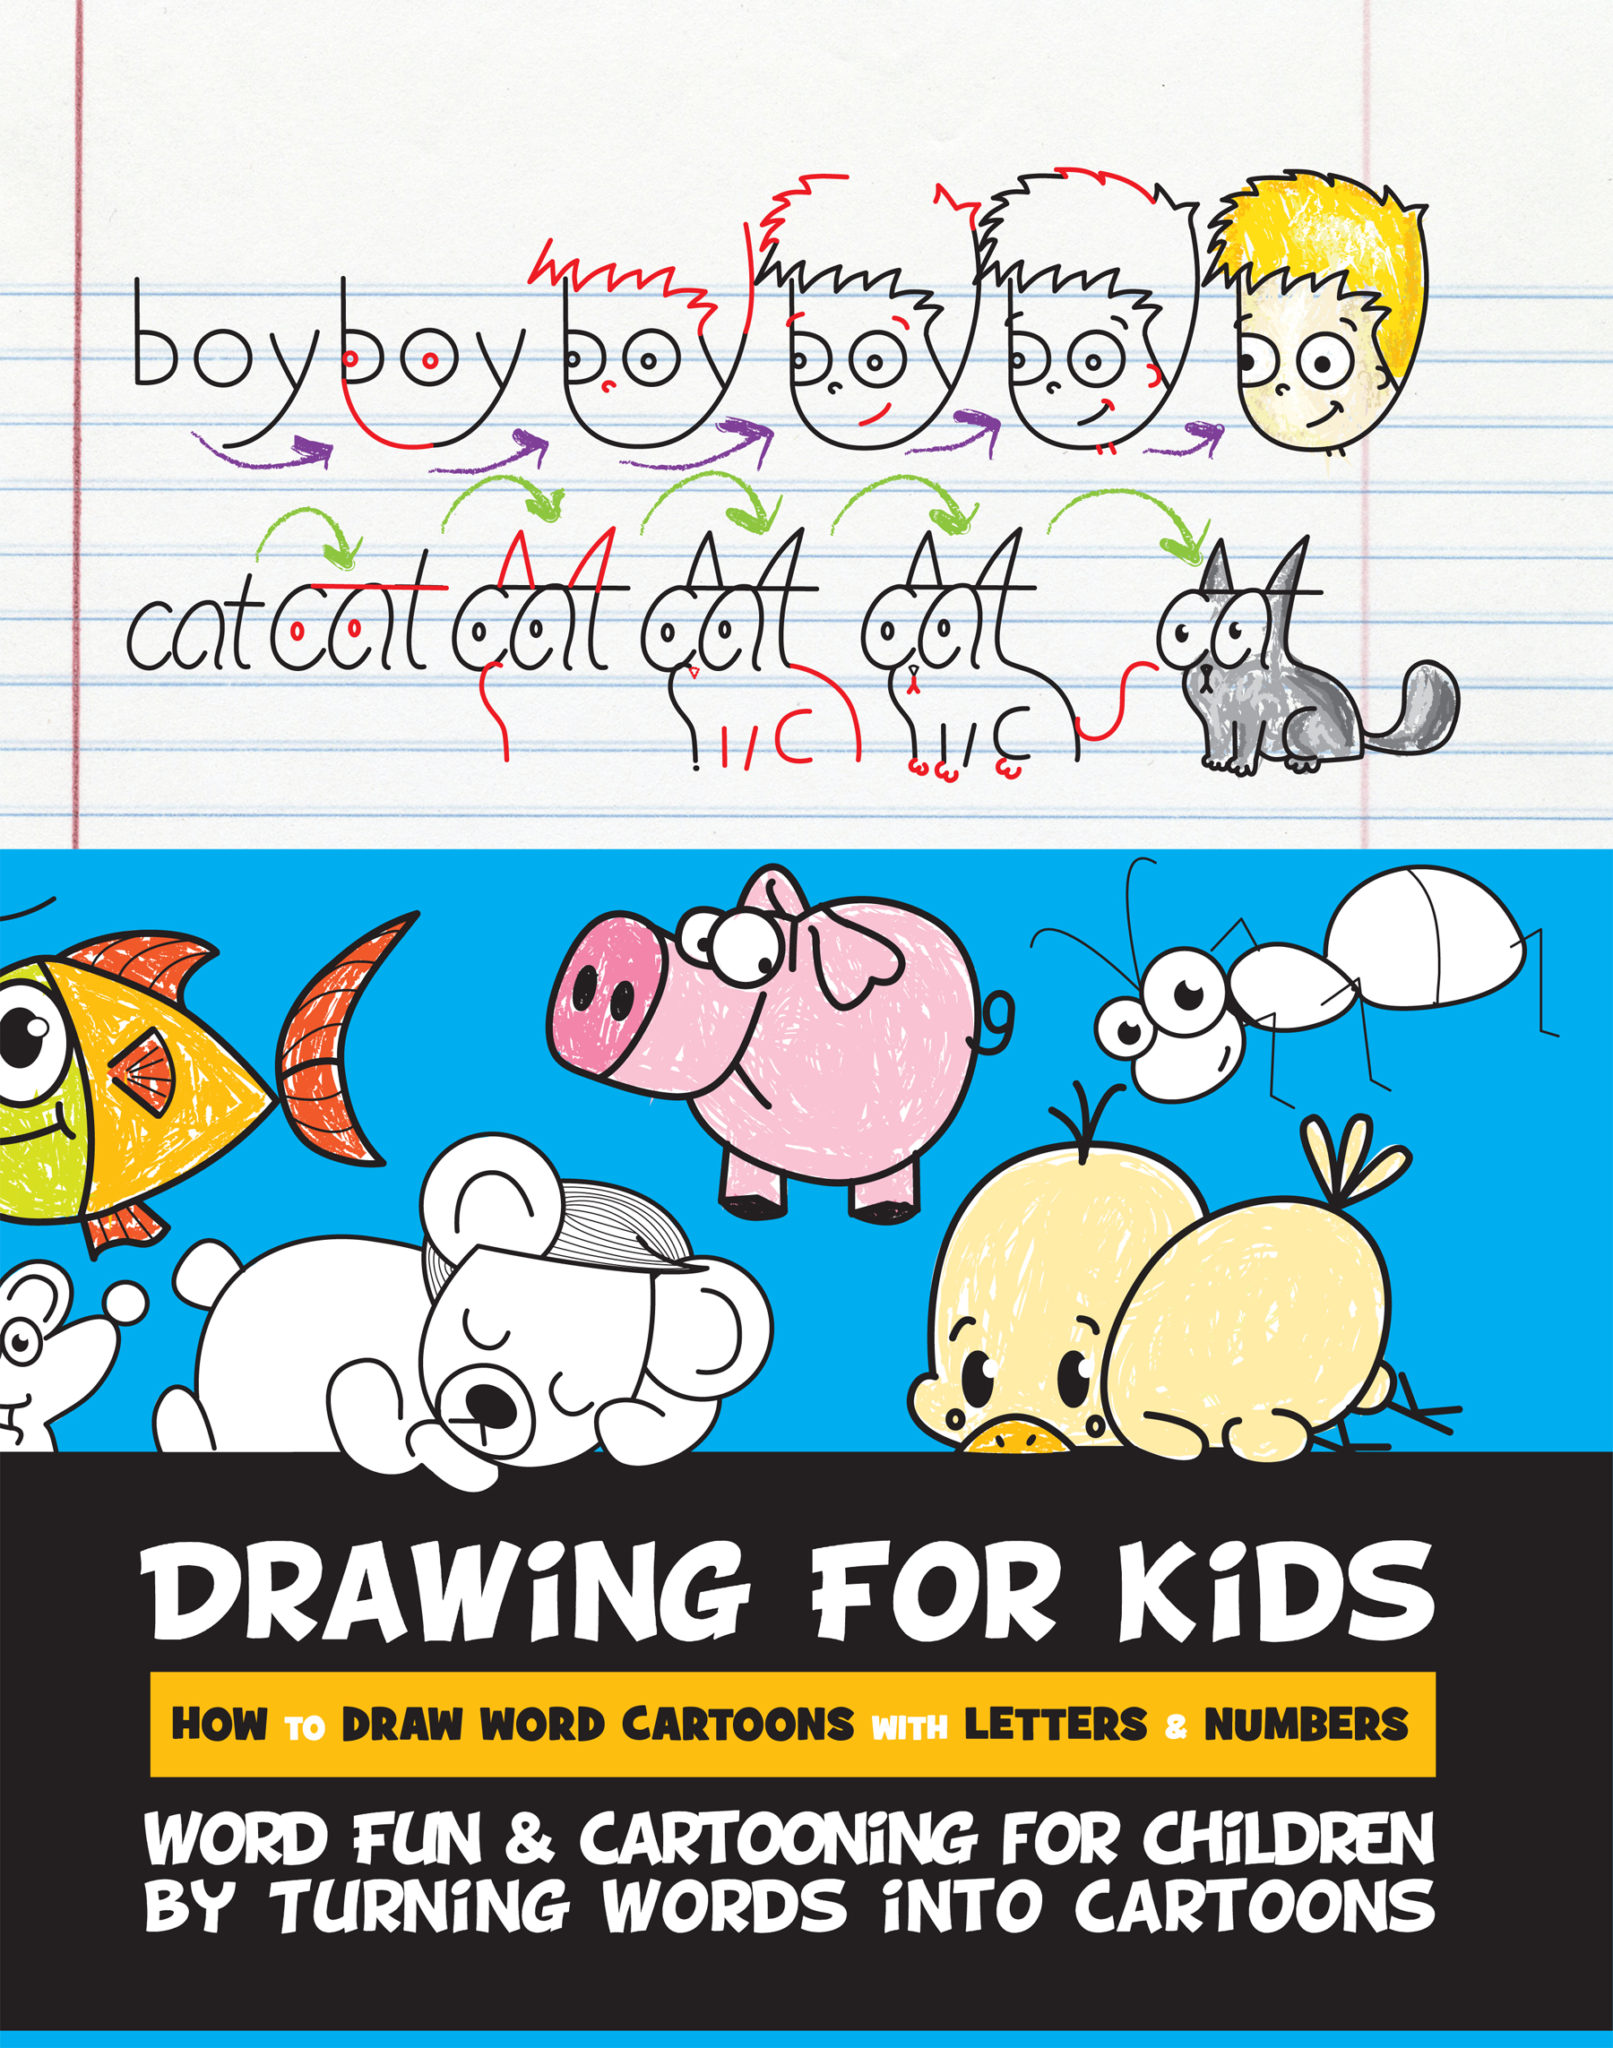 FREE: Drawing for Kids How to Draw Word Cartoons with Letters & Numbers: Word Fun & Cartooning for Children by Turning Words into Cartoons by Rachel Goldstein